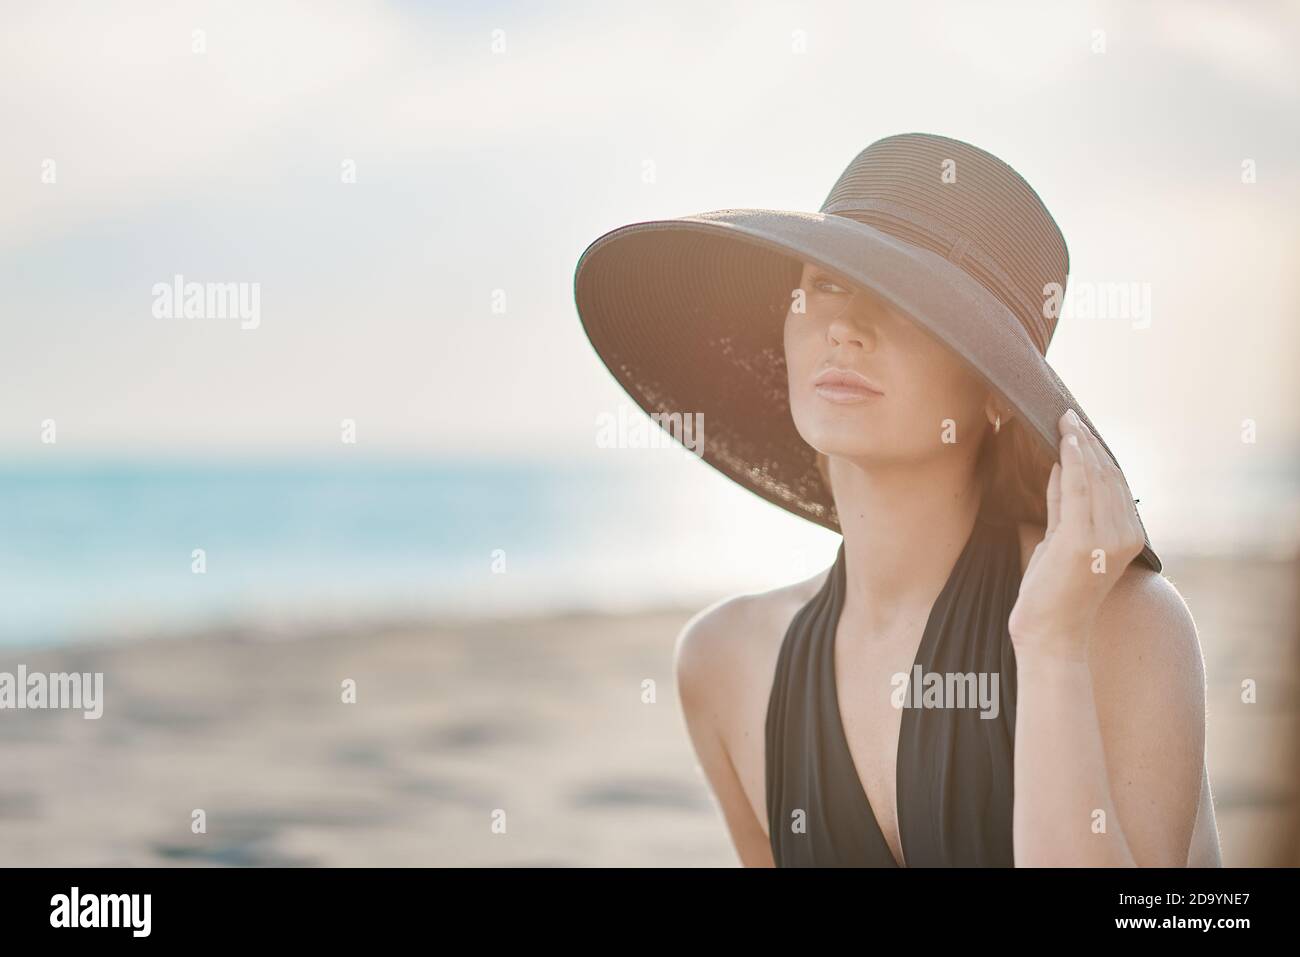 A woman with a hat on her head looking out to sea Stock Photo